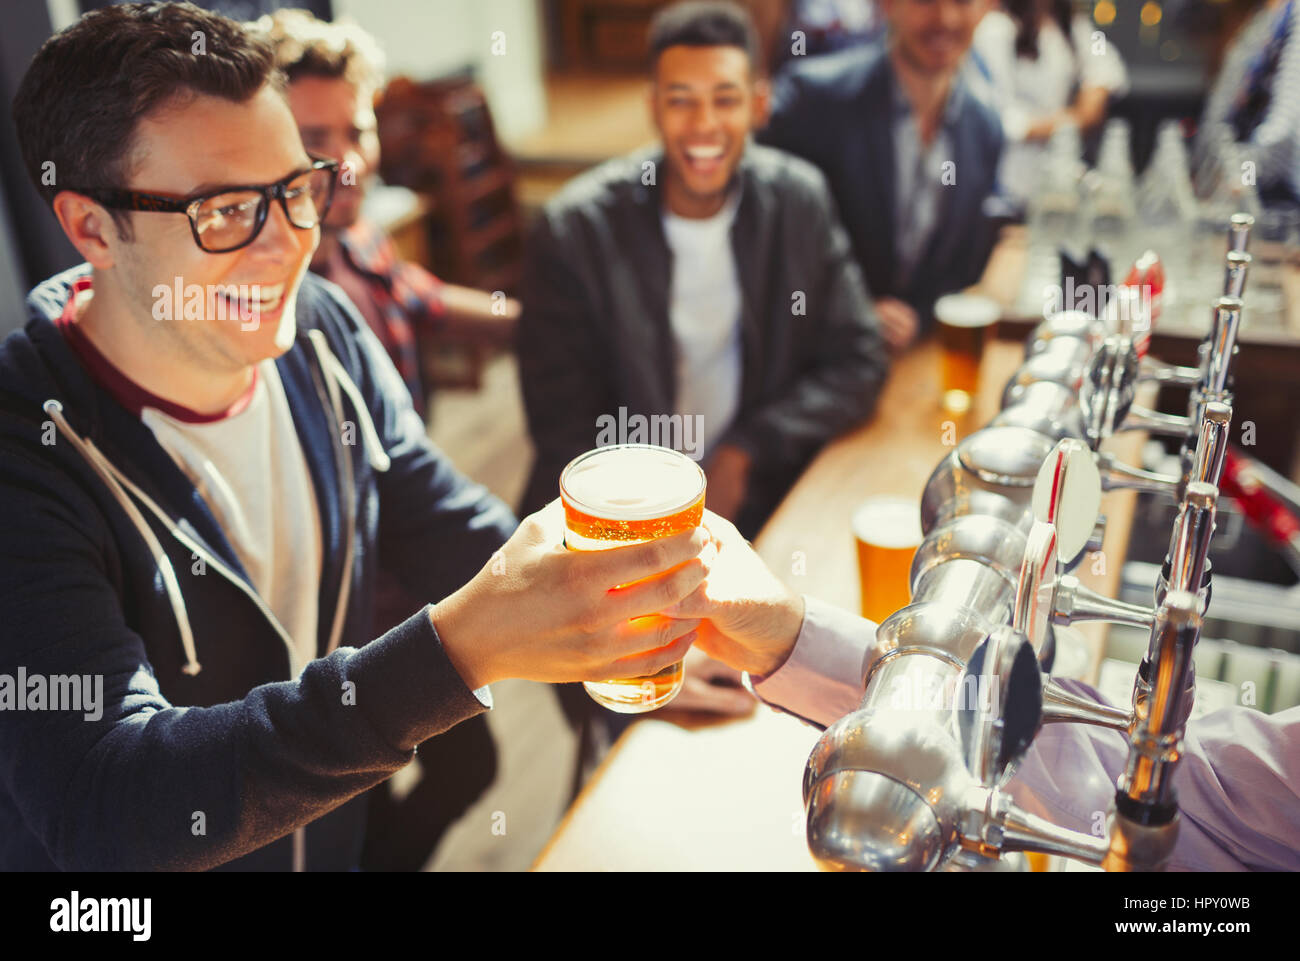 Smiling man receiving beer from bartender at bar Stock Photo